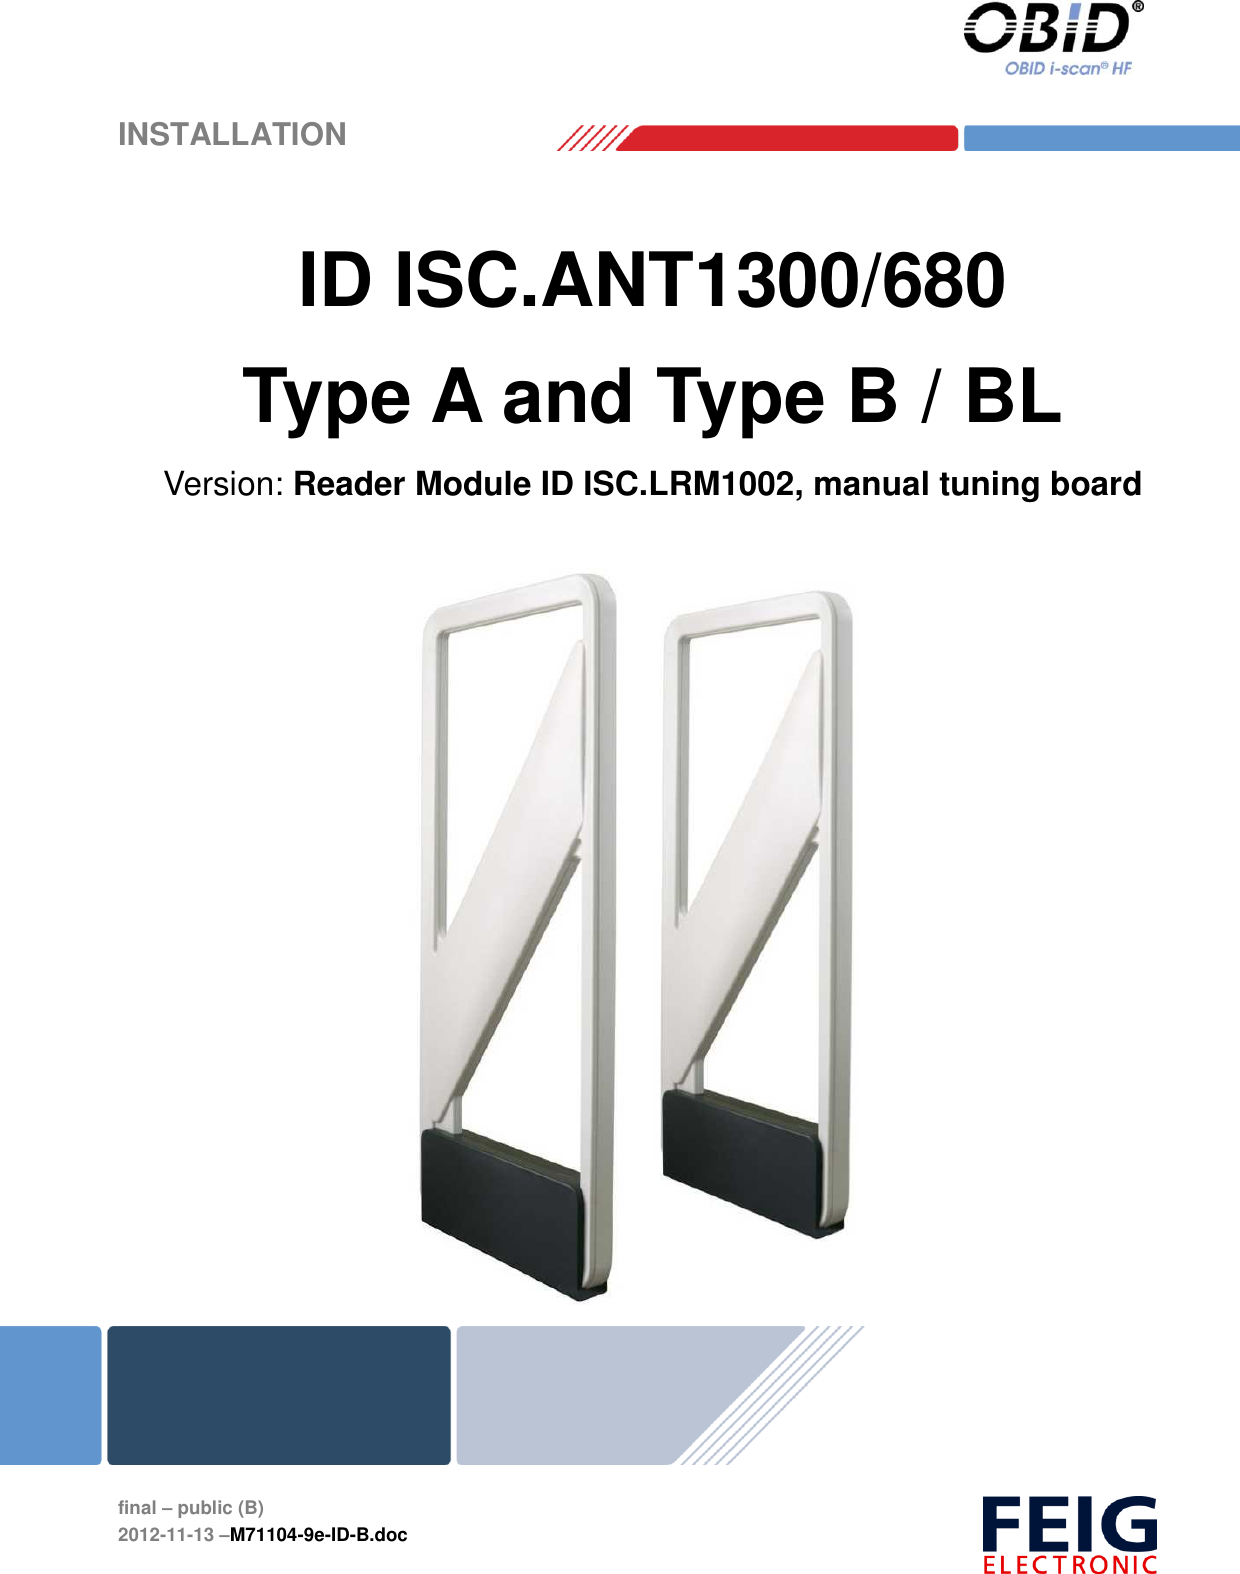    INSTALLATION   final – public (B) 2012-11-13 –M71104-9e-ID-B.doc   ID ISC.ANT1300/680 Type A and Type B / BL Version: Reader Module ID ISC.LRM1002, manual tuning board     